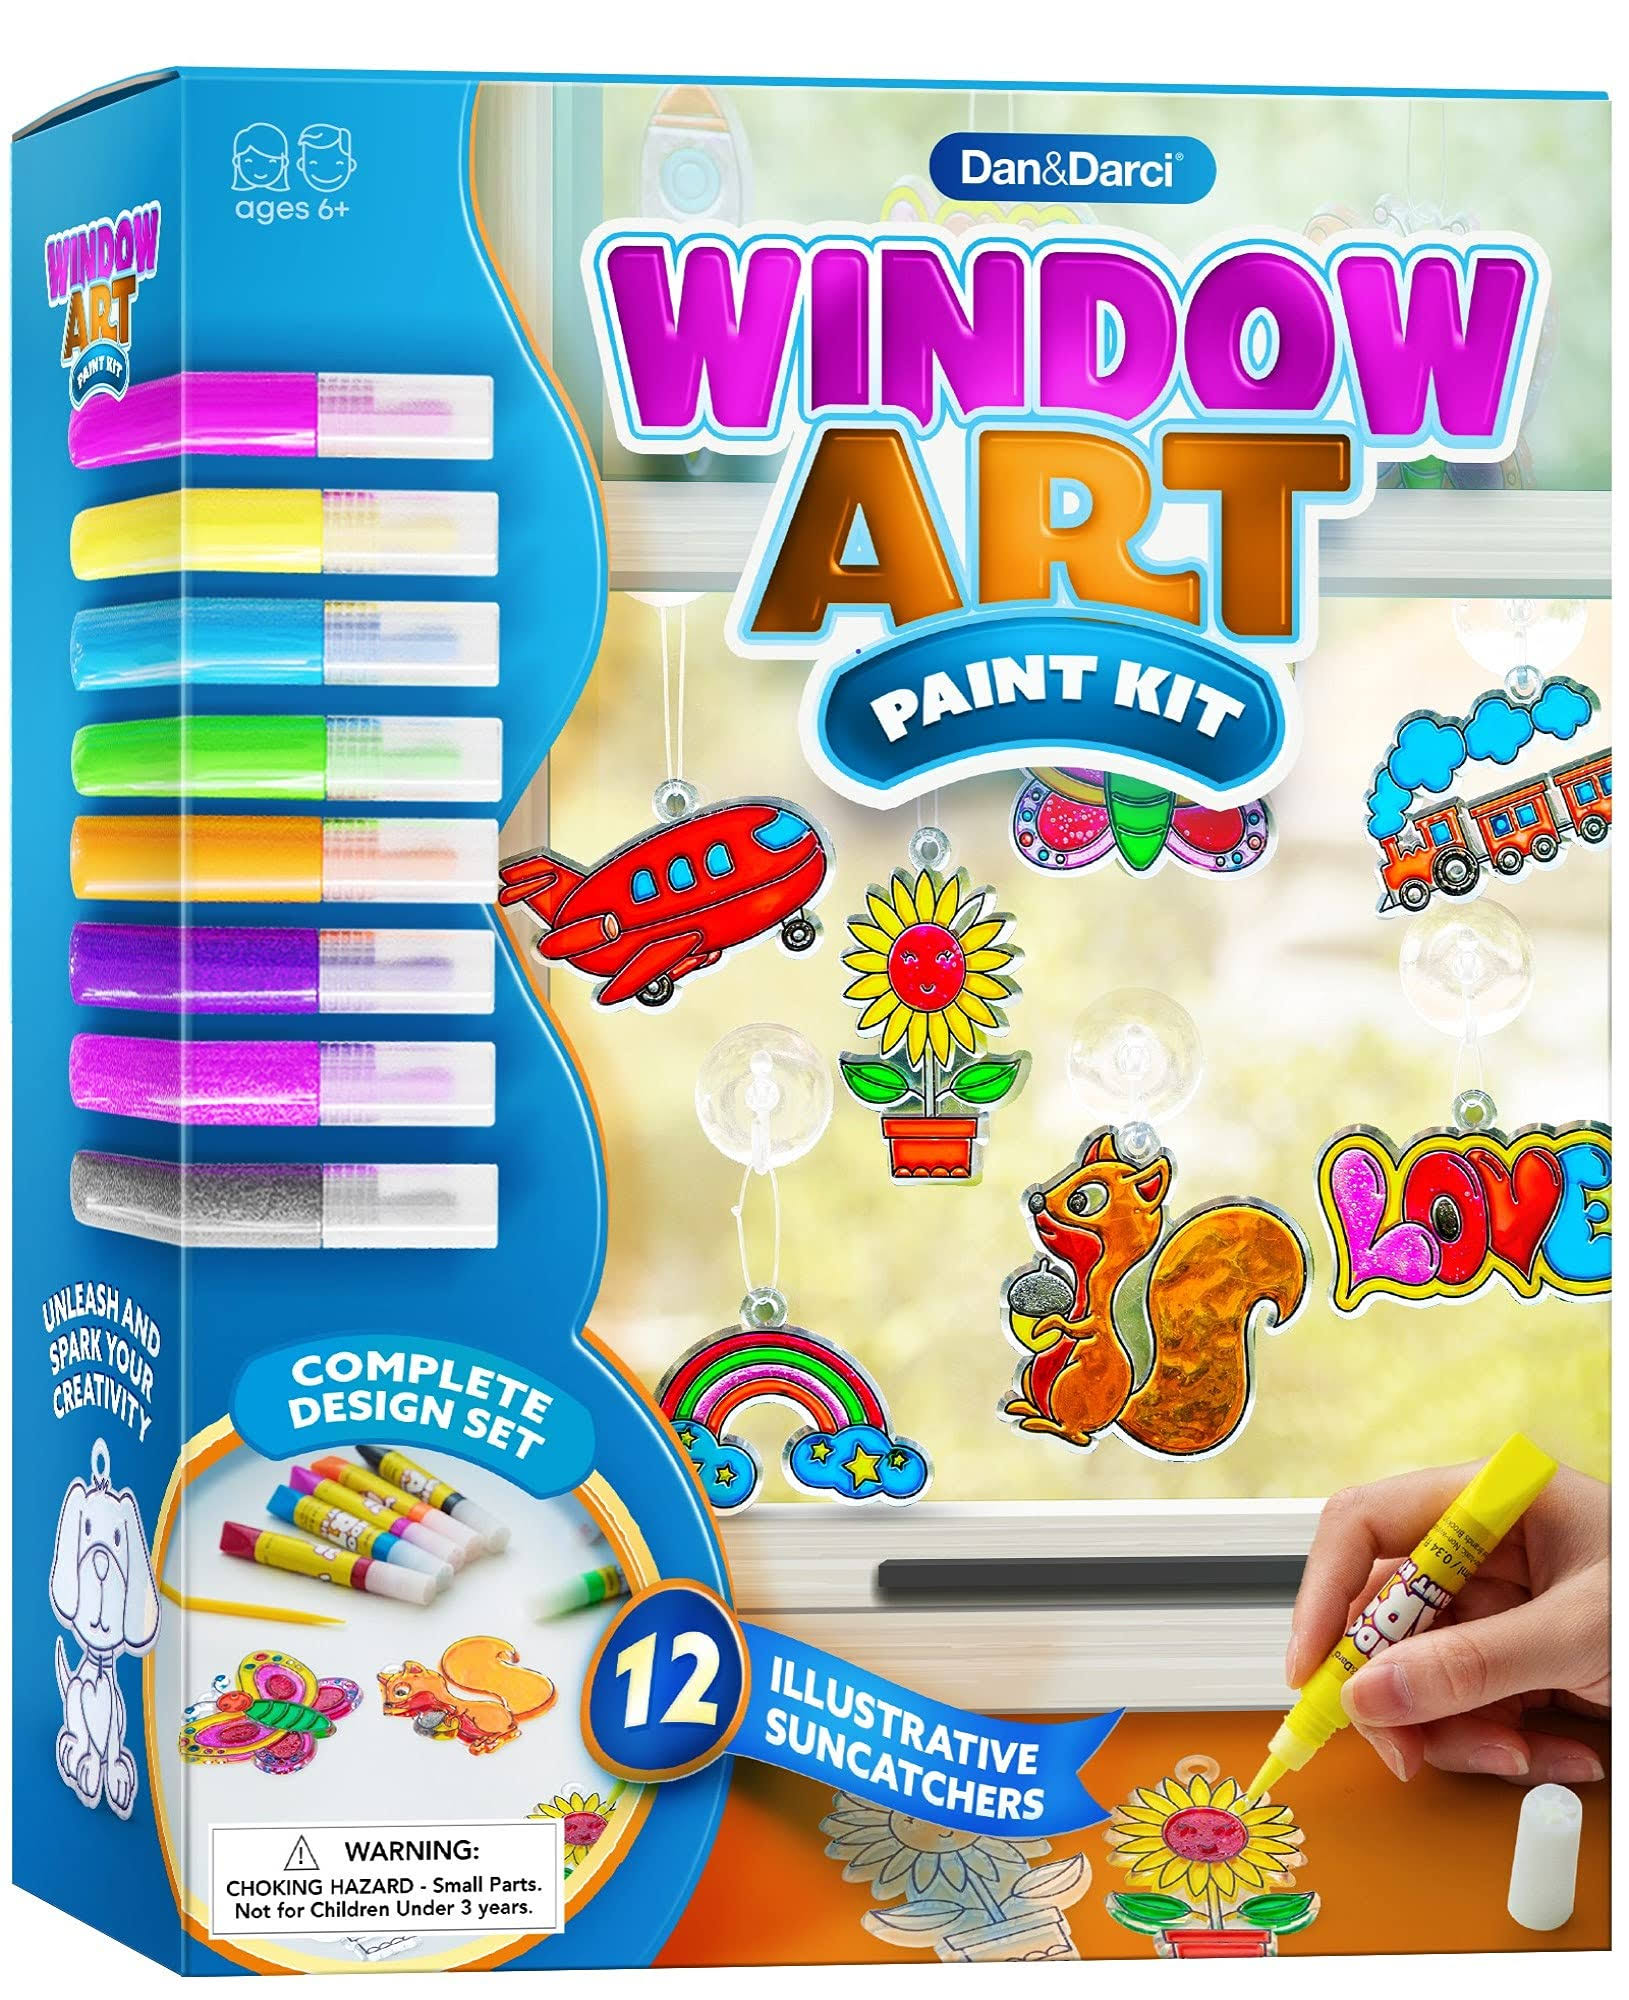 Window Art Suncatcher Painting Kit For Kids - Arts and Crafts For Girls & Boys Ages 6-12 - Craft Kits Art Set - Indoor Sun Catcher Paint Kits - Craft